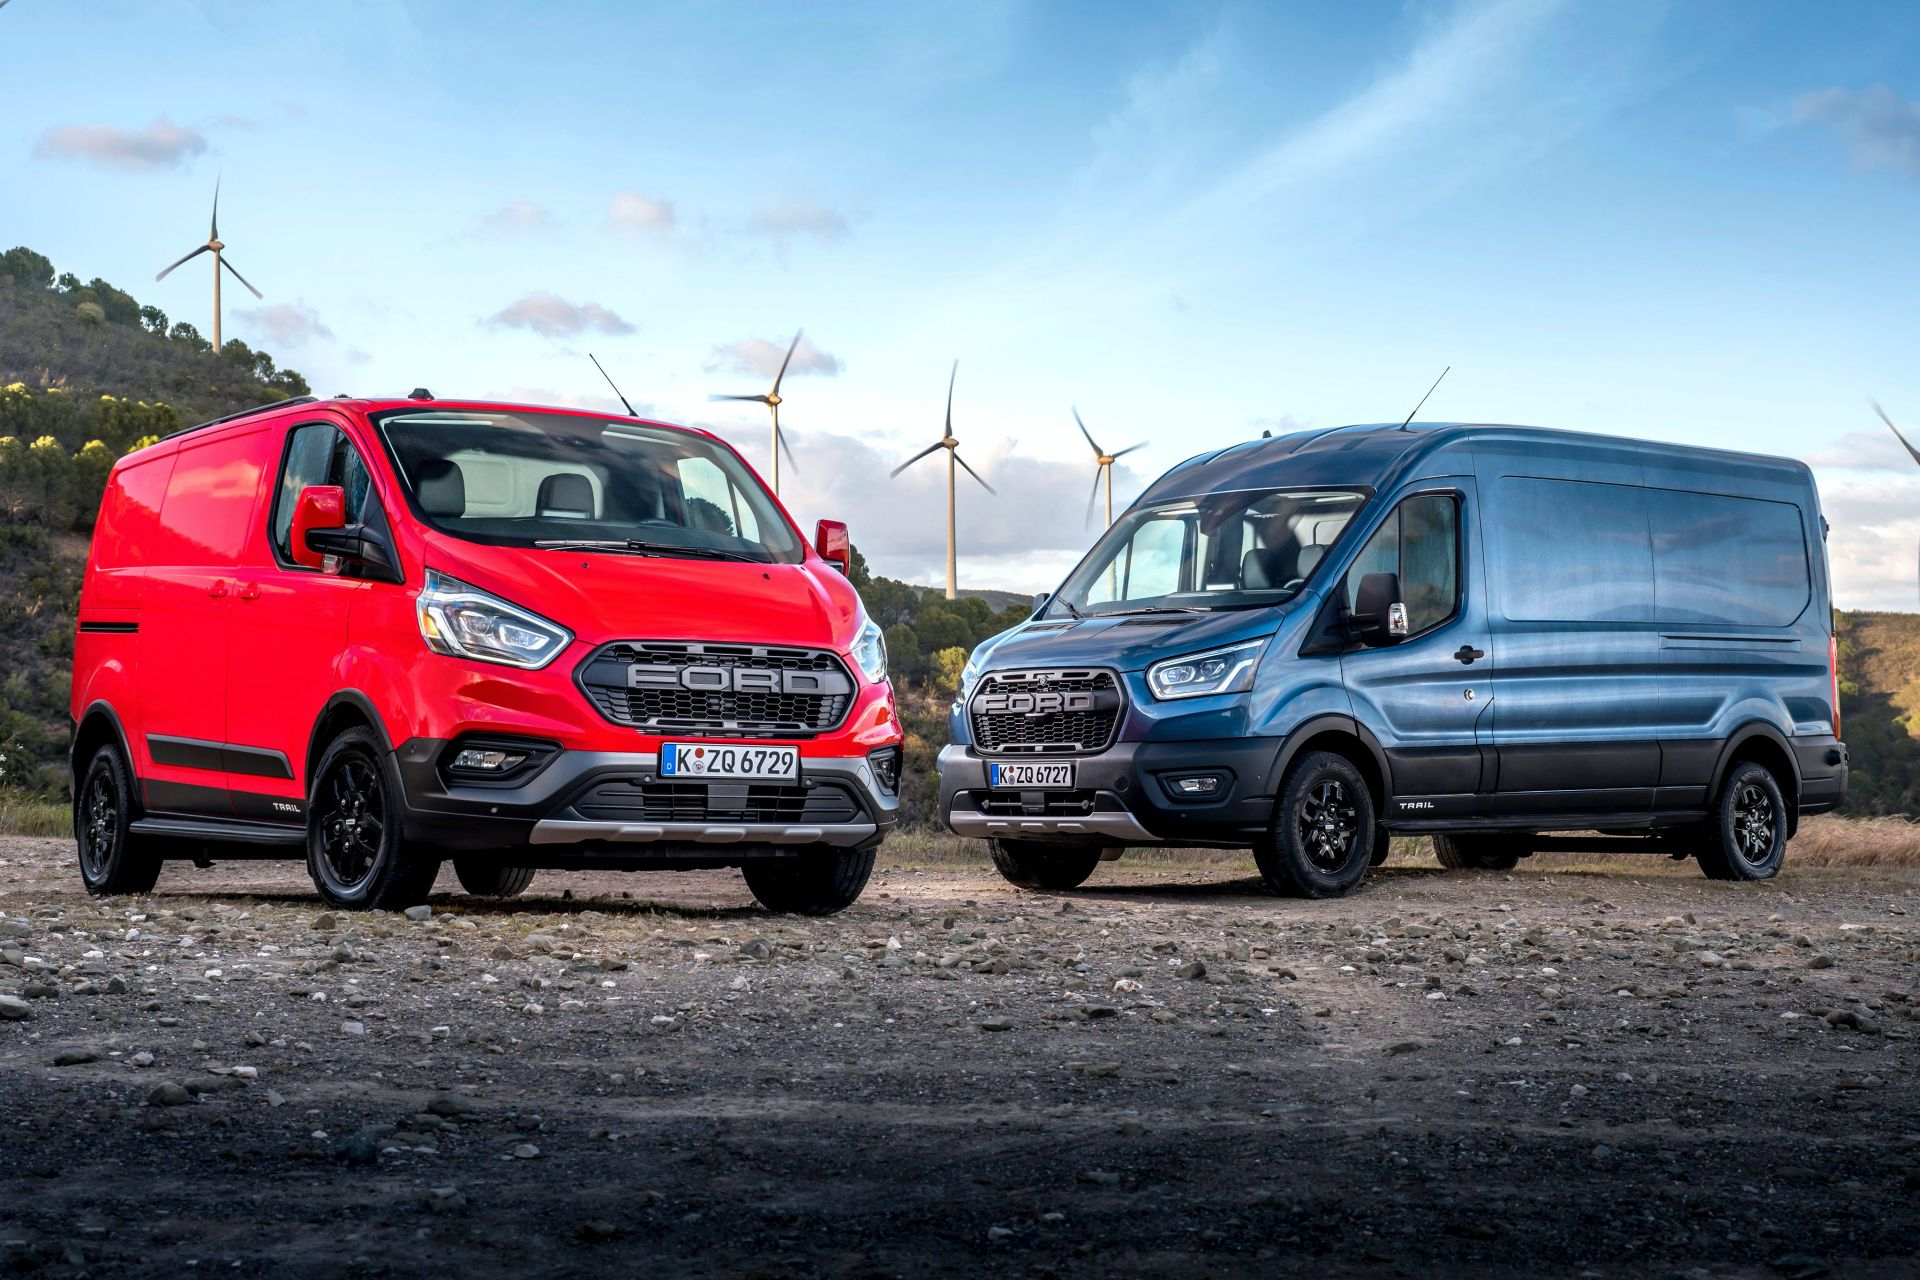 New 2022 Ford Transit 4x4 Release Date ...